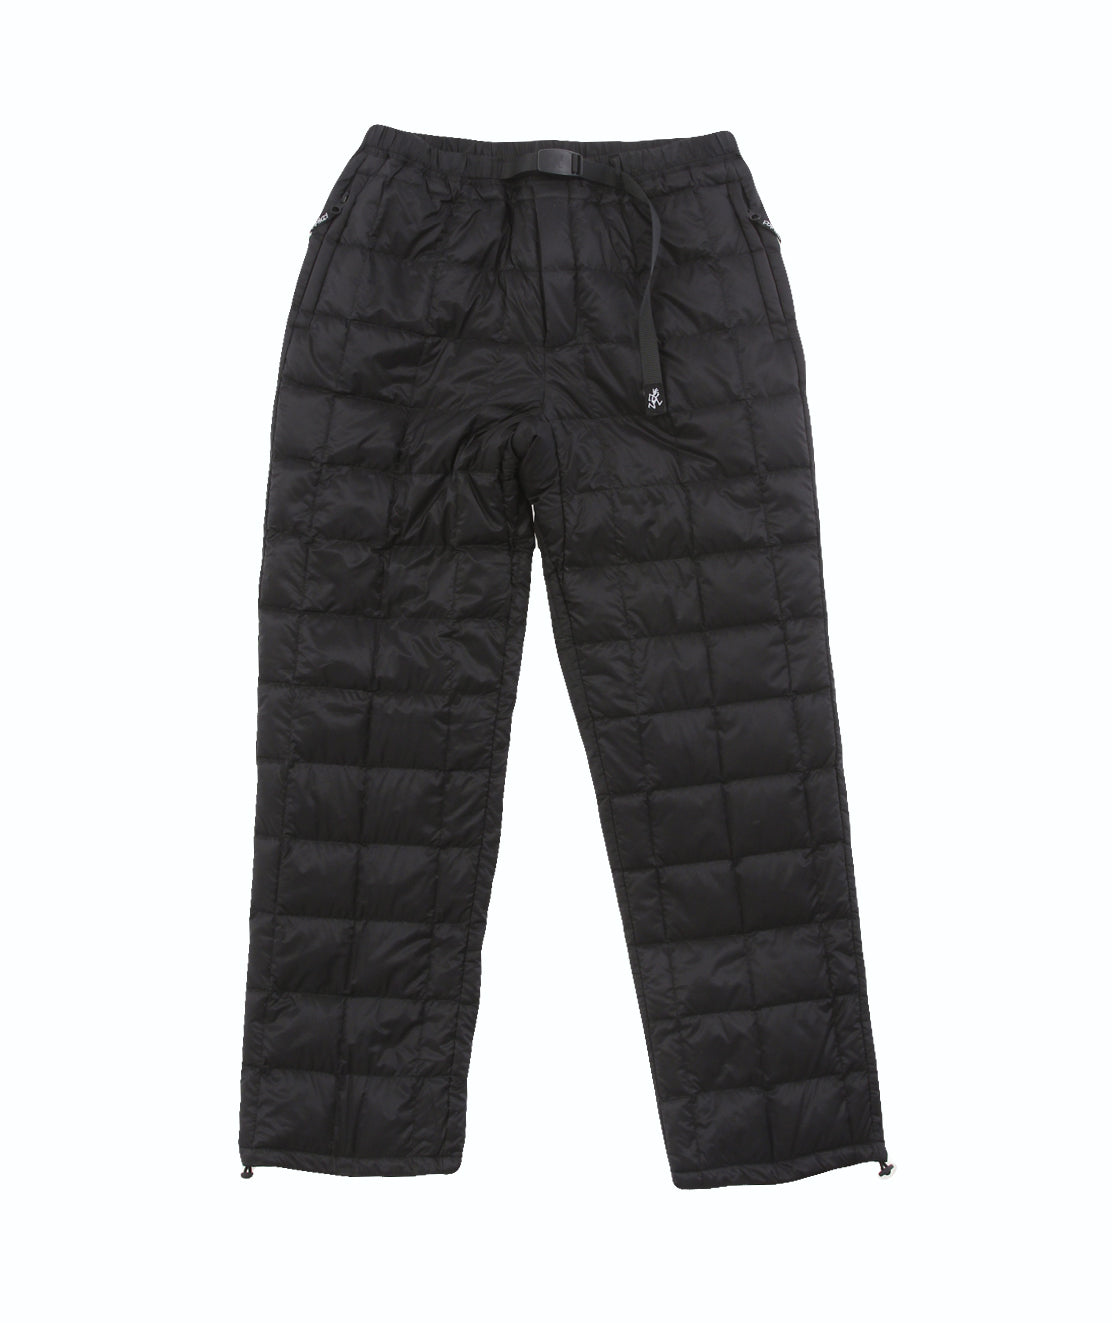 Gramicci x Taion Down Pant Black | Shop at Copperfield